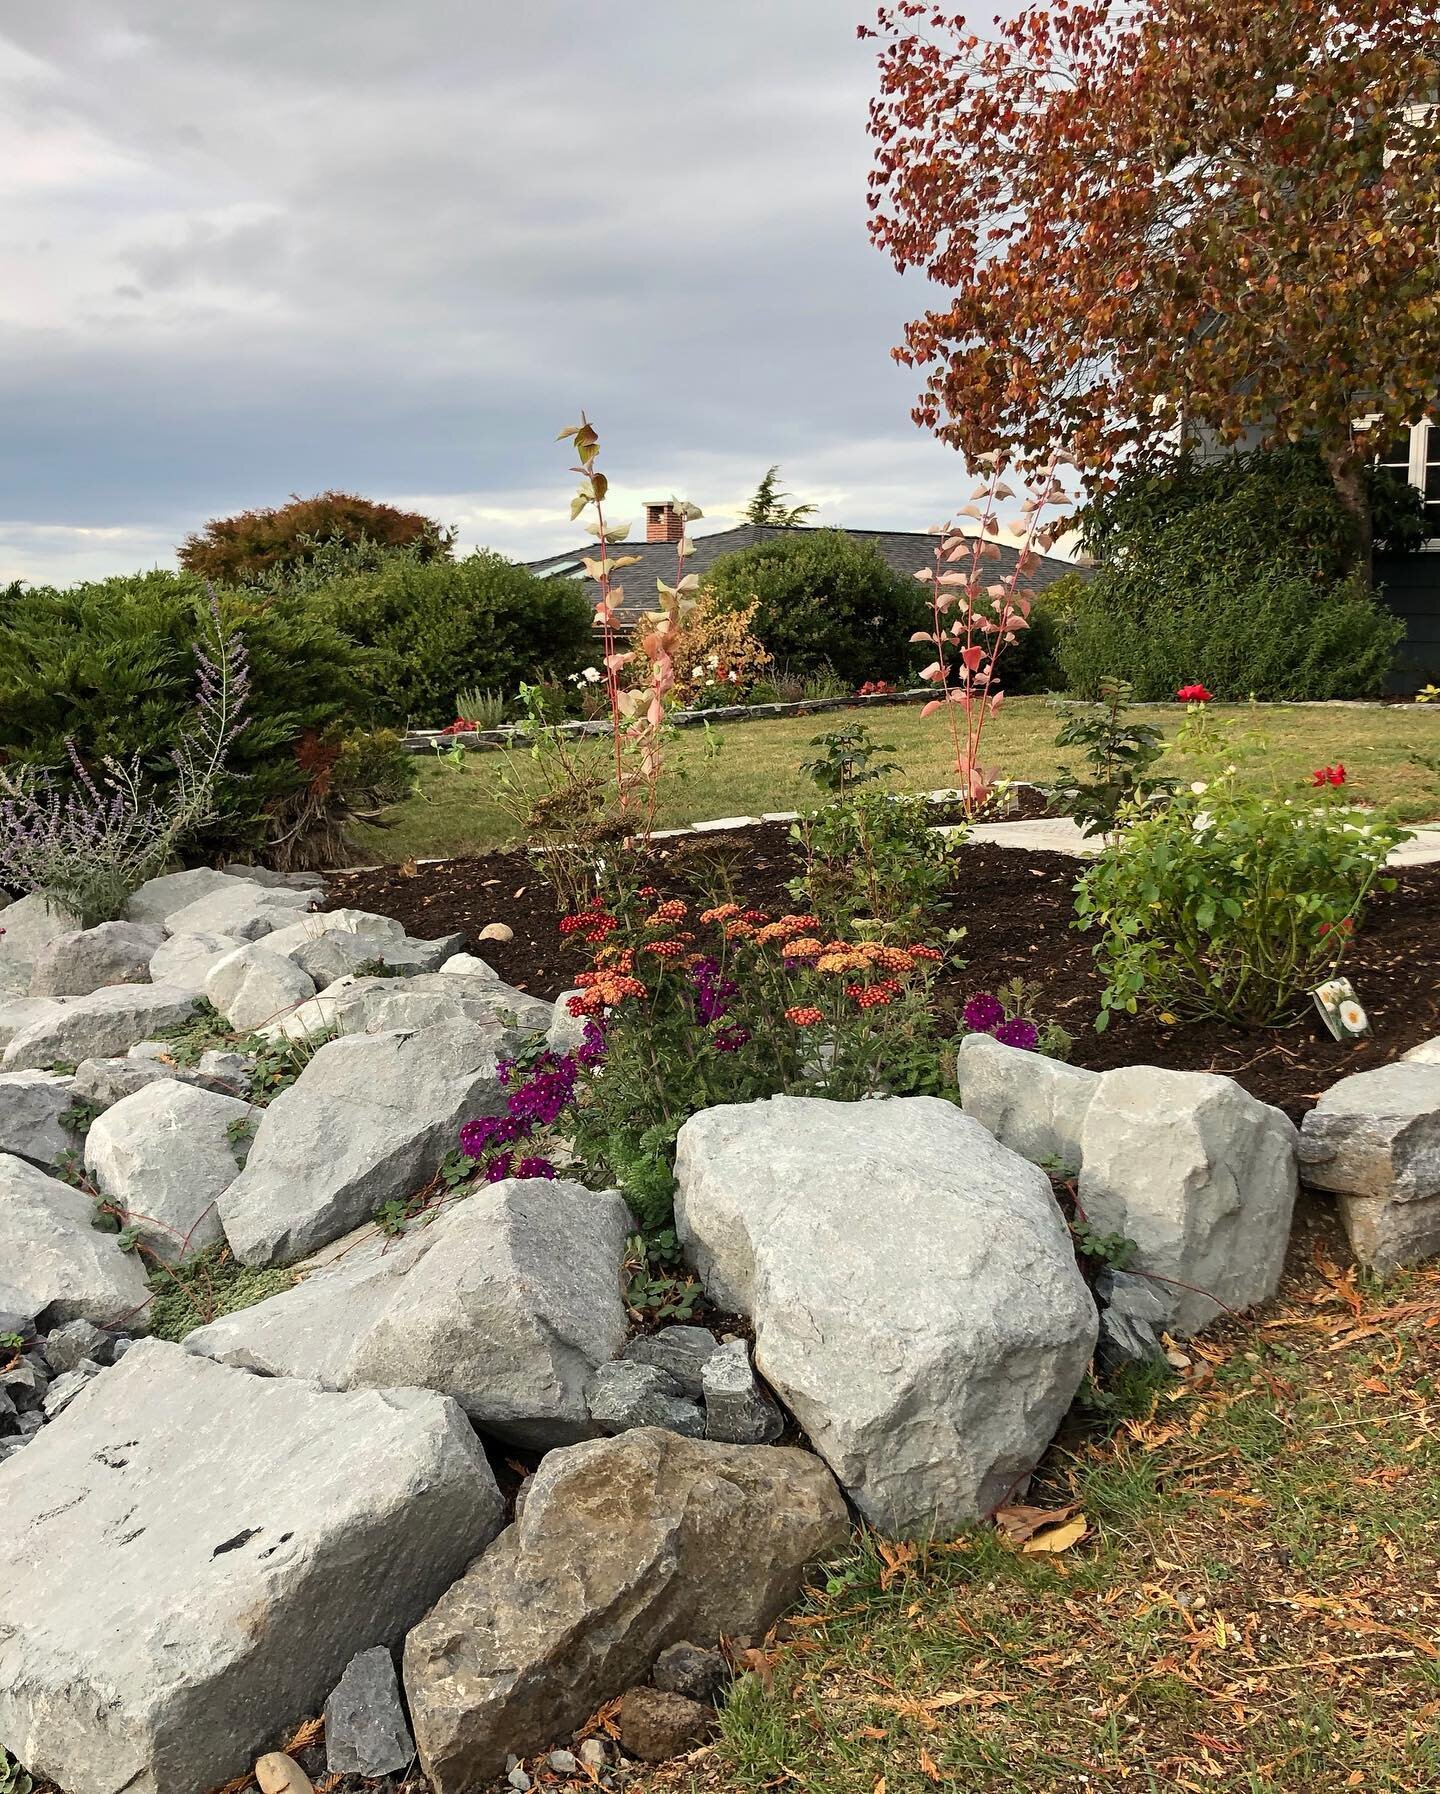 Our Blue Ridge boulder and drystack project was so much fun. We were tasked with covering up the utility boxes at the front and to add a retaining wall to the hillside to make it safer for kids. 

The result was a luscious garden full of native and b